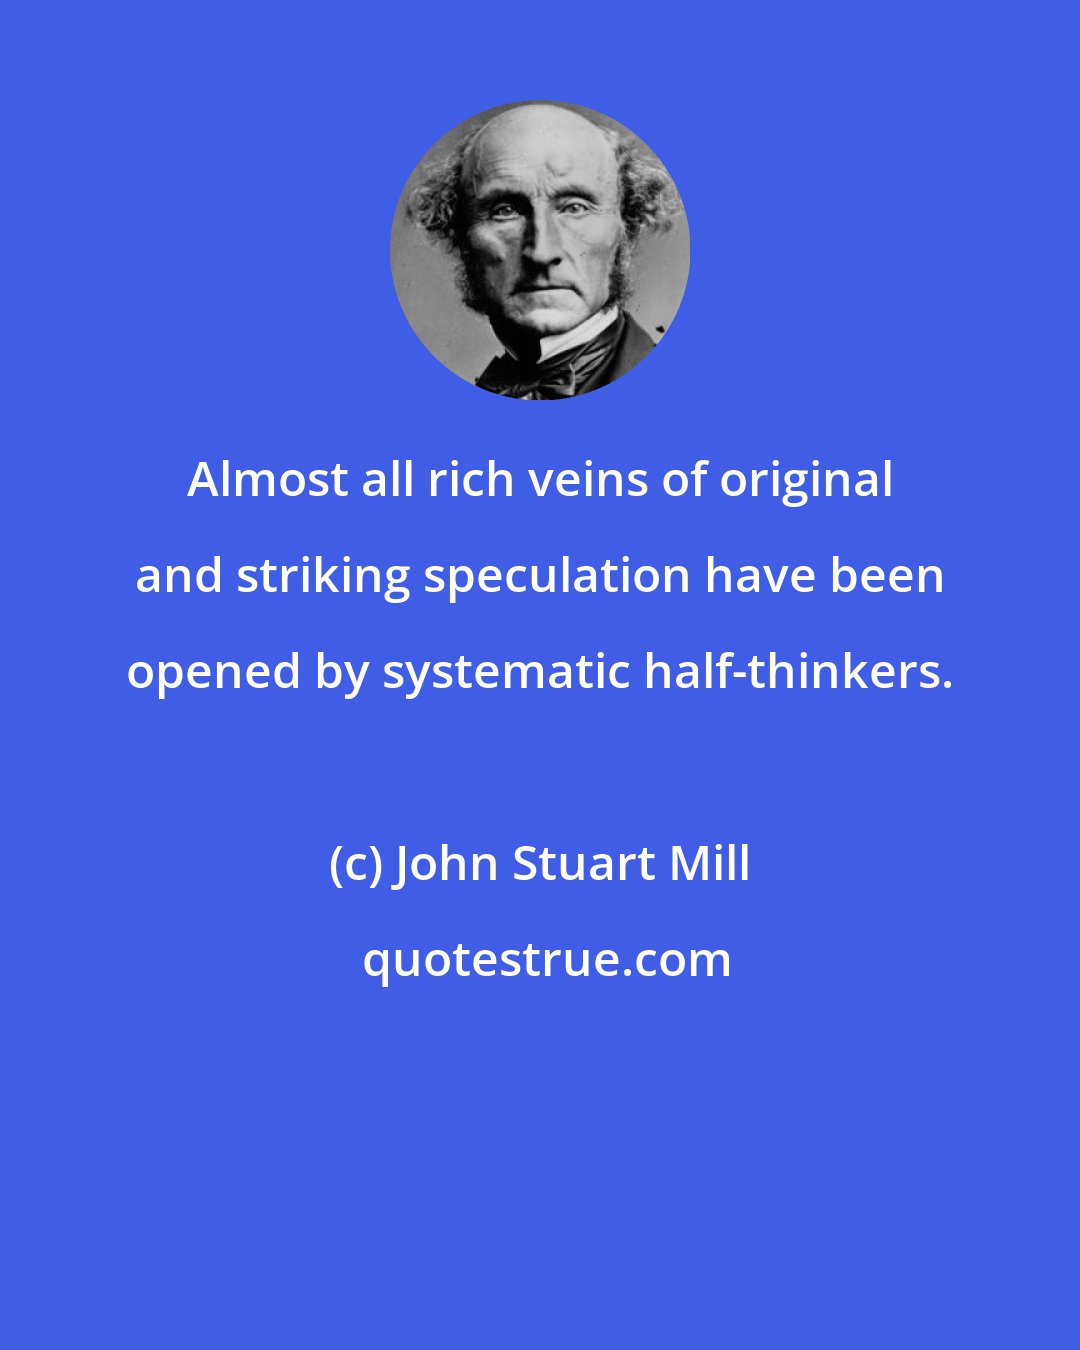 John Stuart Mill: Almost all rich veins of original and striking speculation have been opened by systematic half-thinkers.